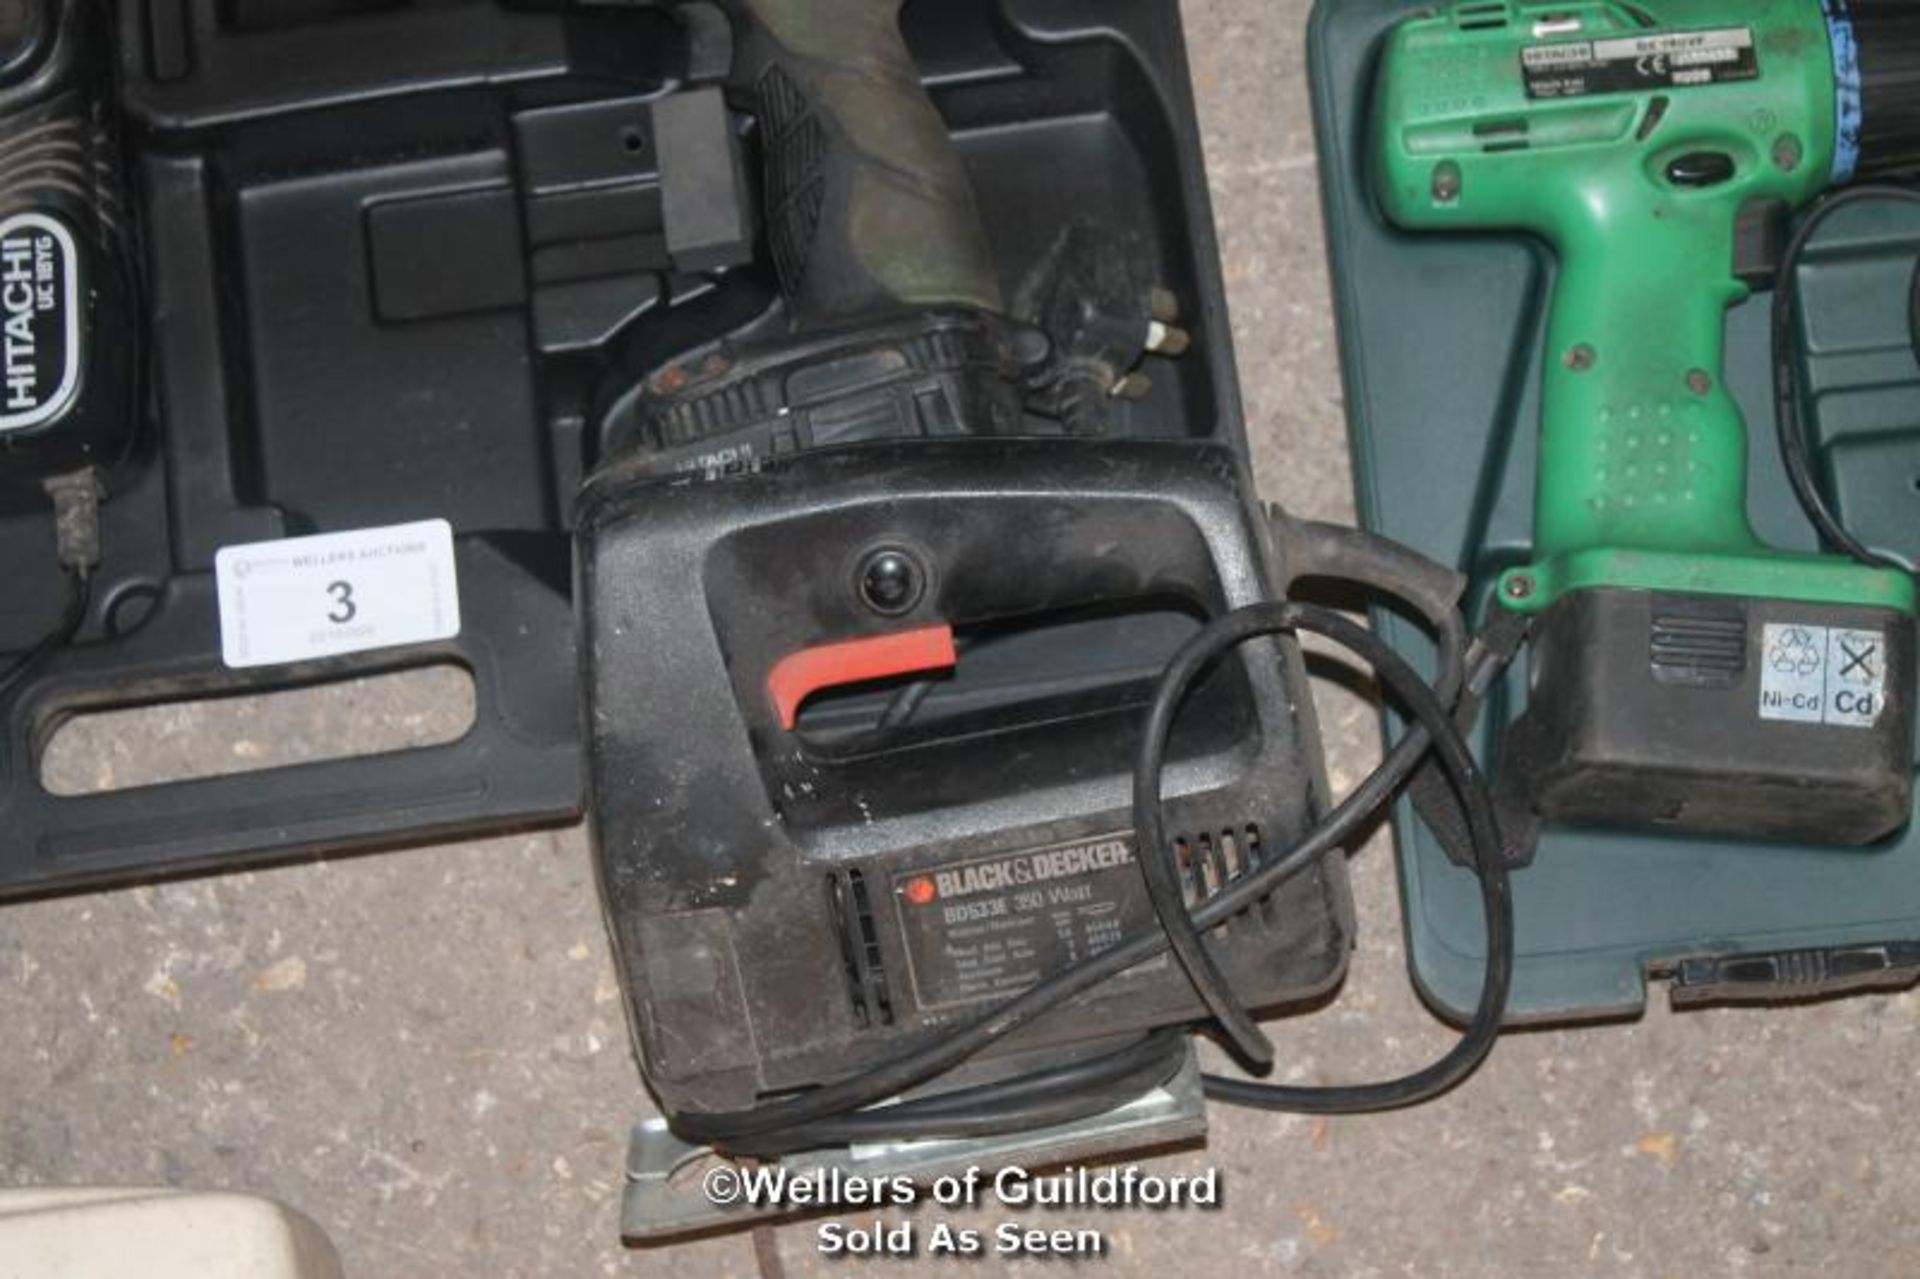 "HITATCHI DV18DVC2 DRILL WITH BATTERY AND CHARGER - HITATCHI D514DF DRILL WITH BATTERY AND - Image 4 of 4